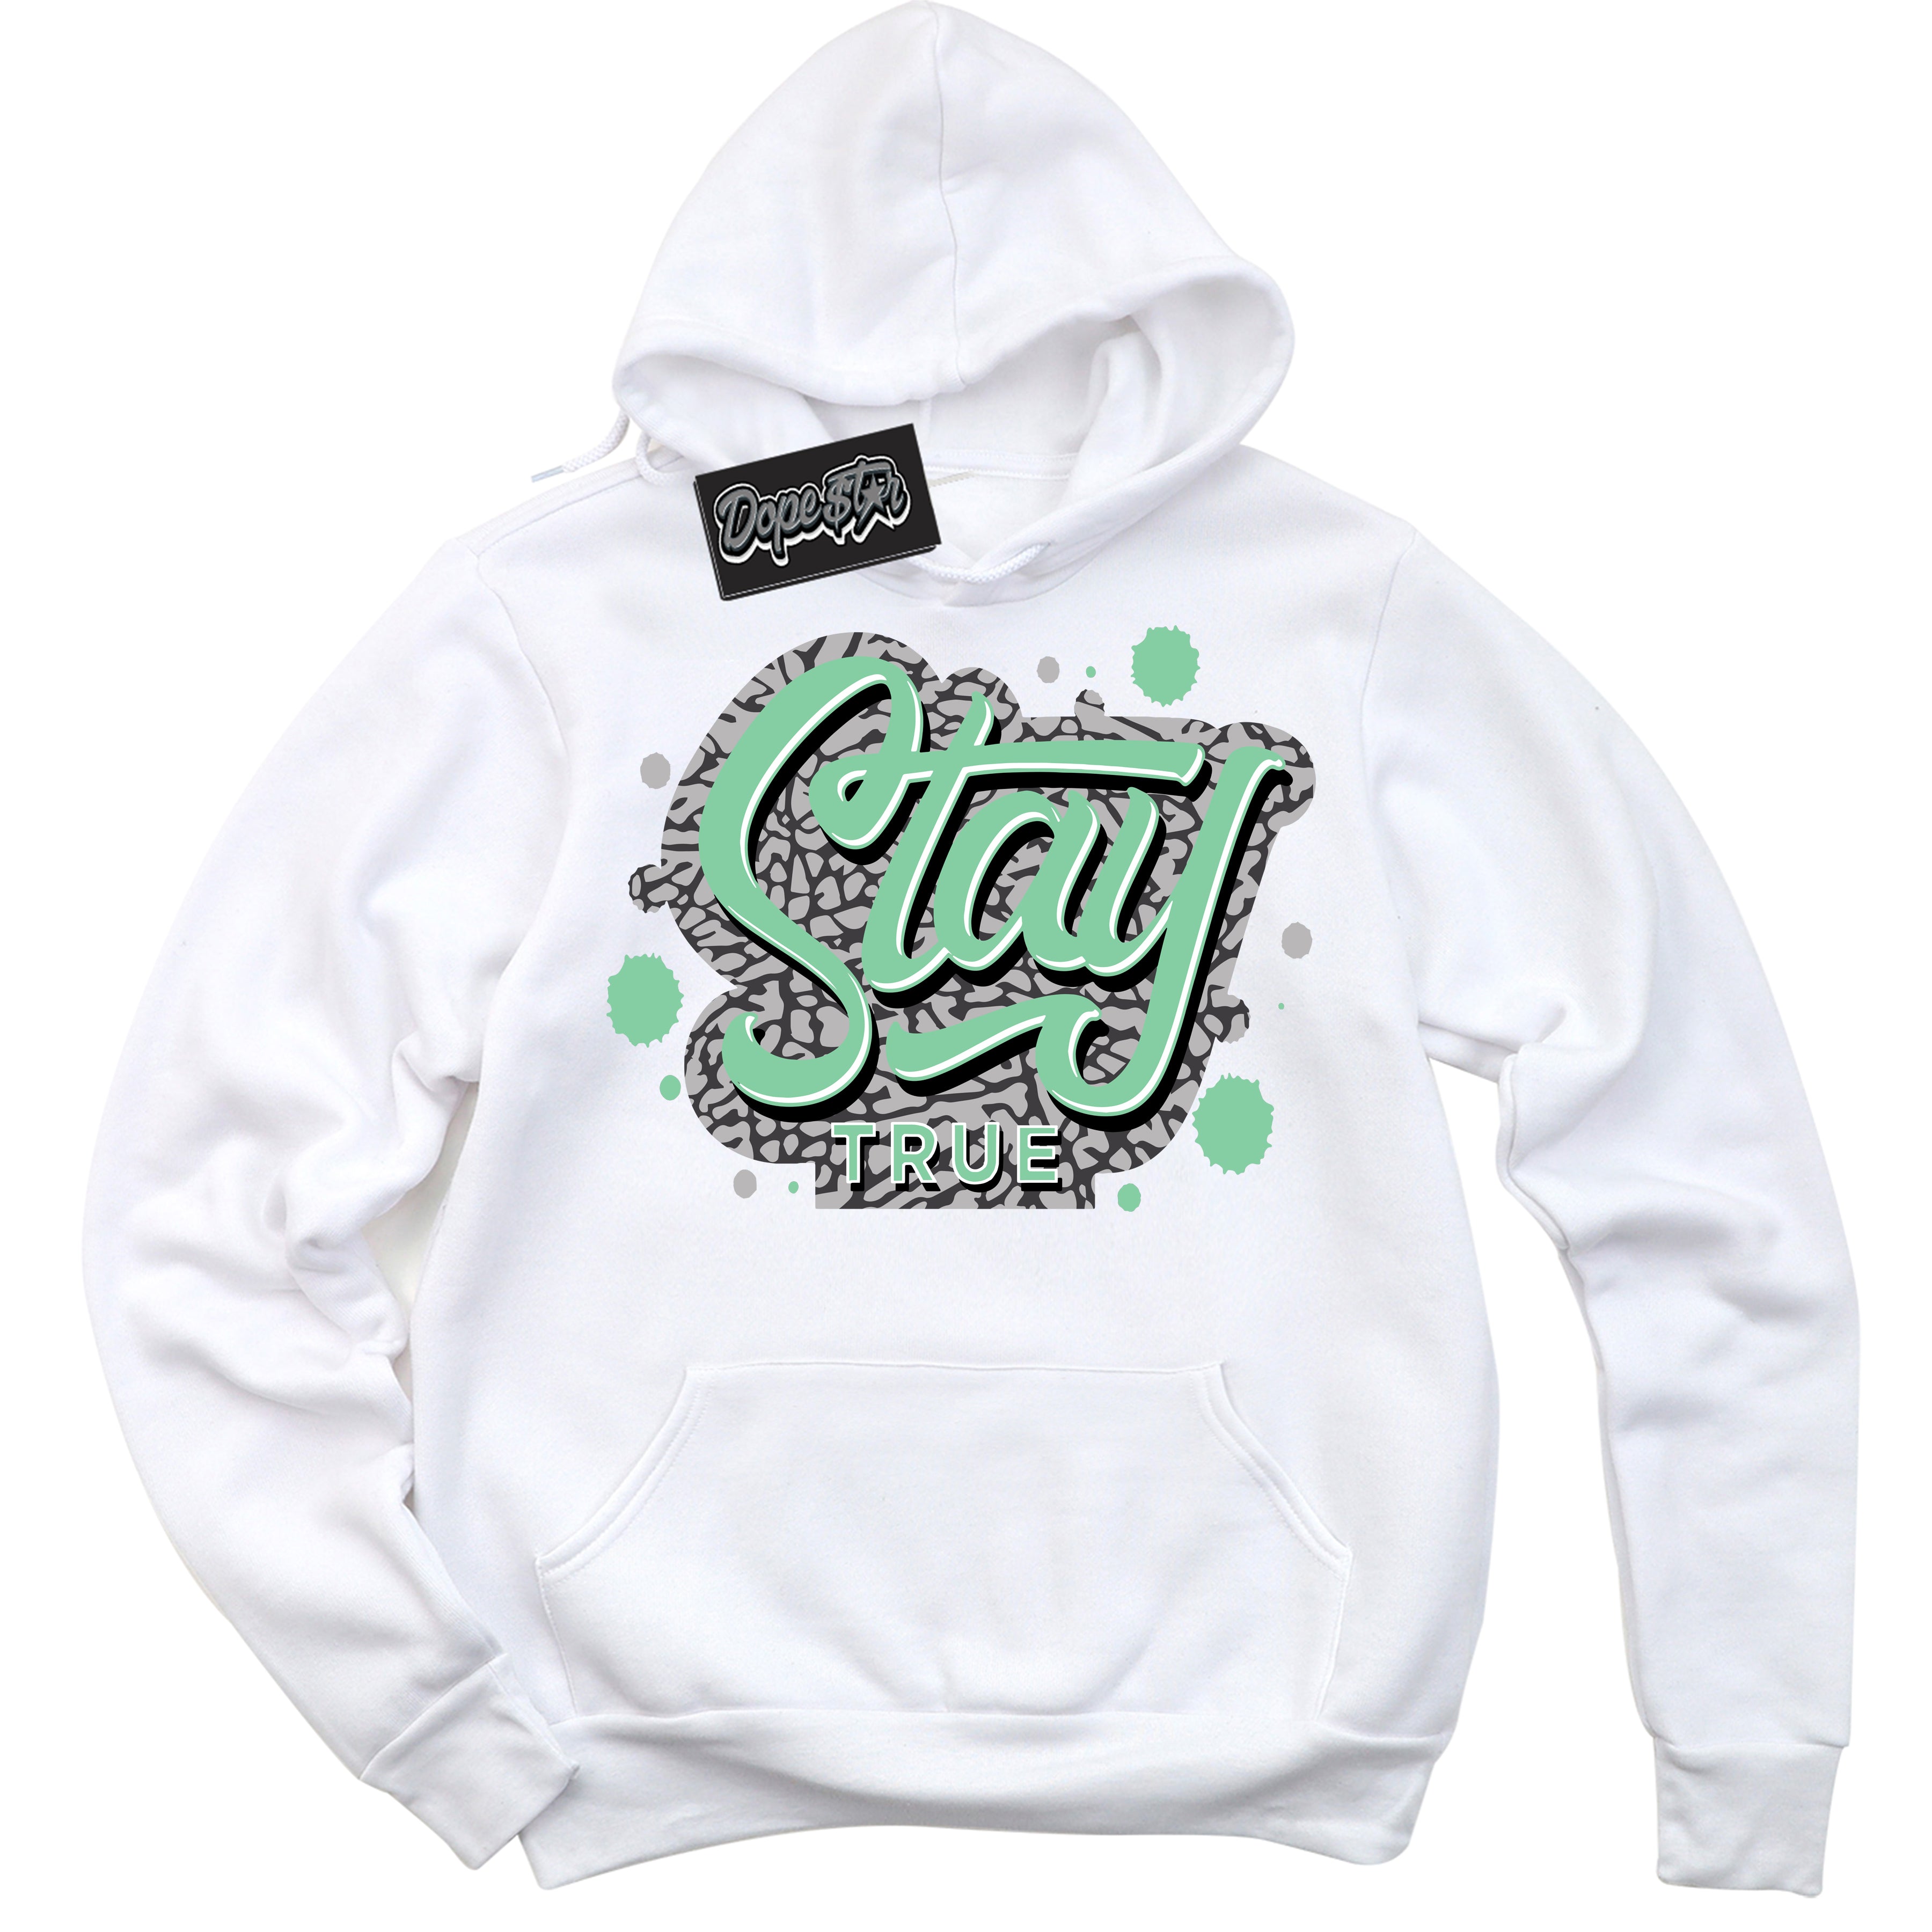 Cool White Graphic DopeStar Hoodie with “ Stay True “ print, that perfectly matches Green Glow 3s sneakers